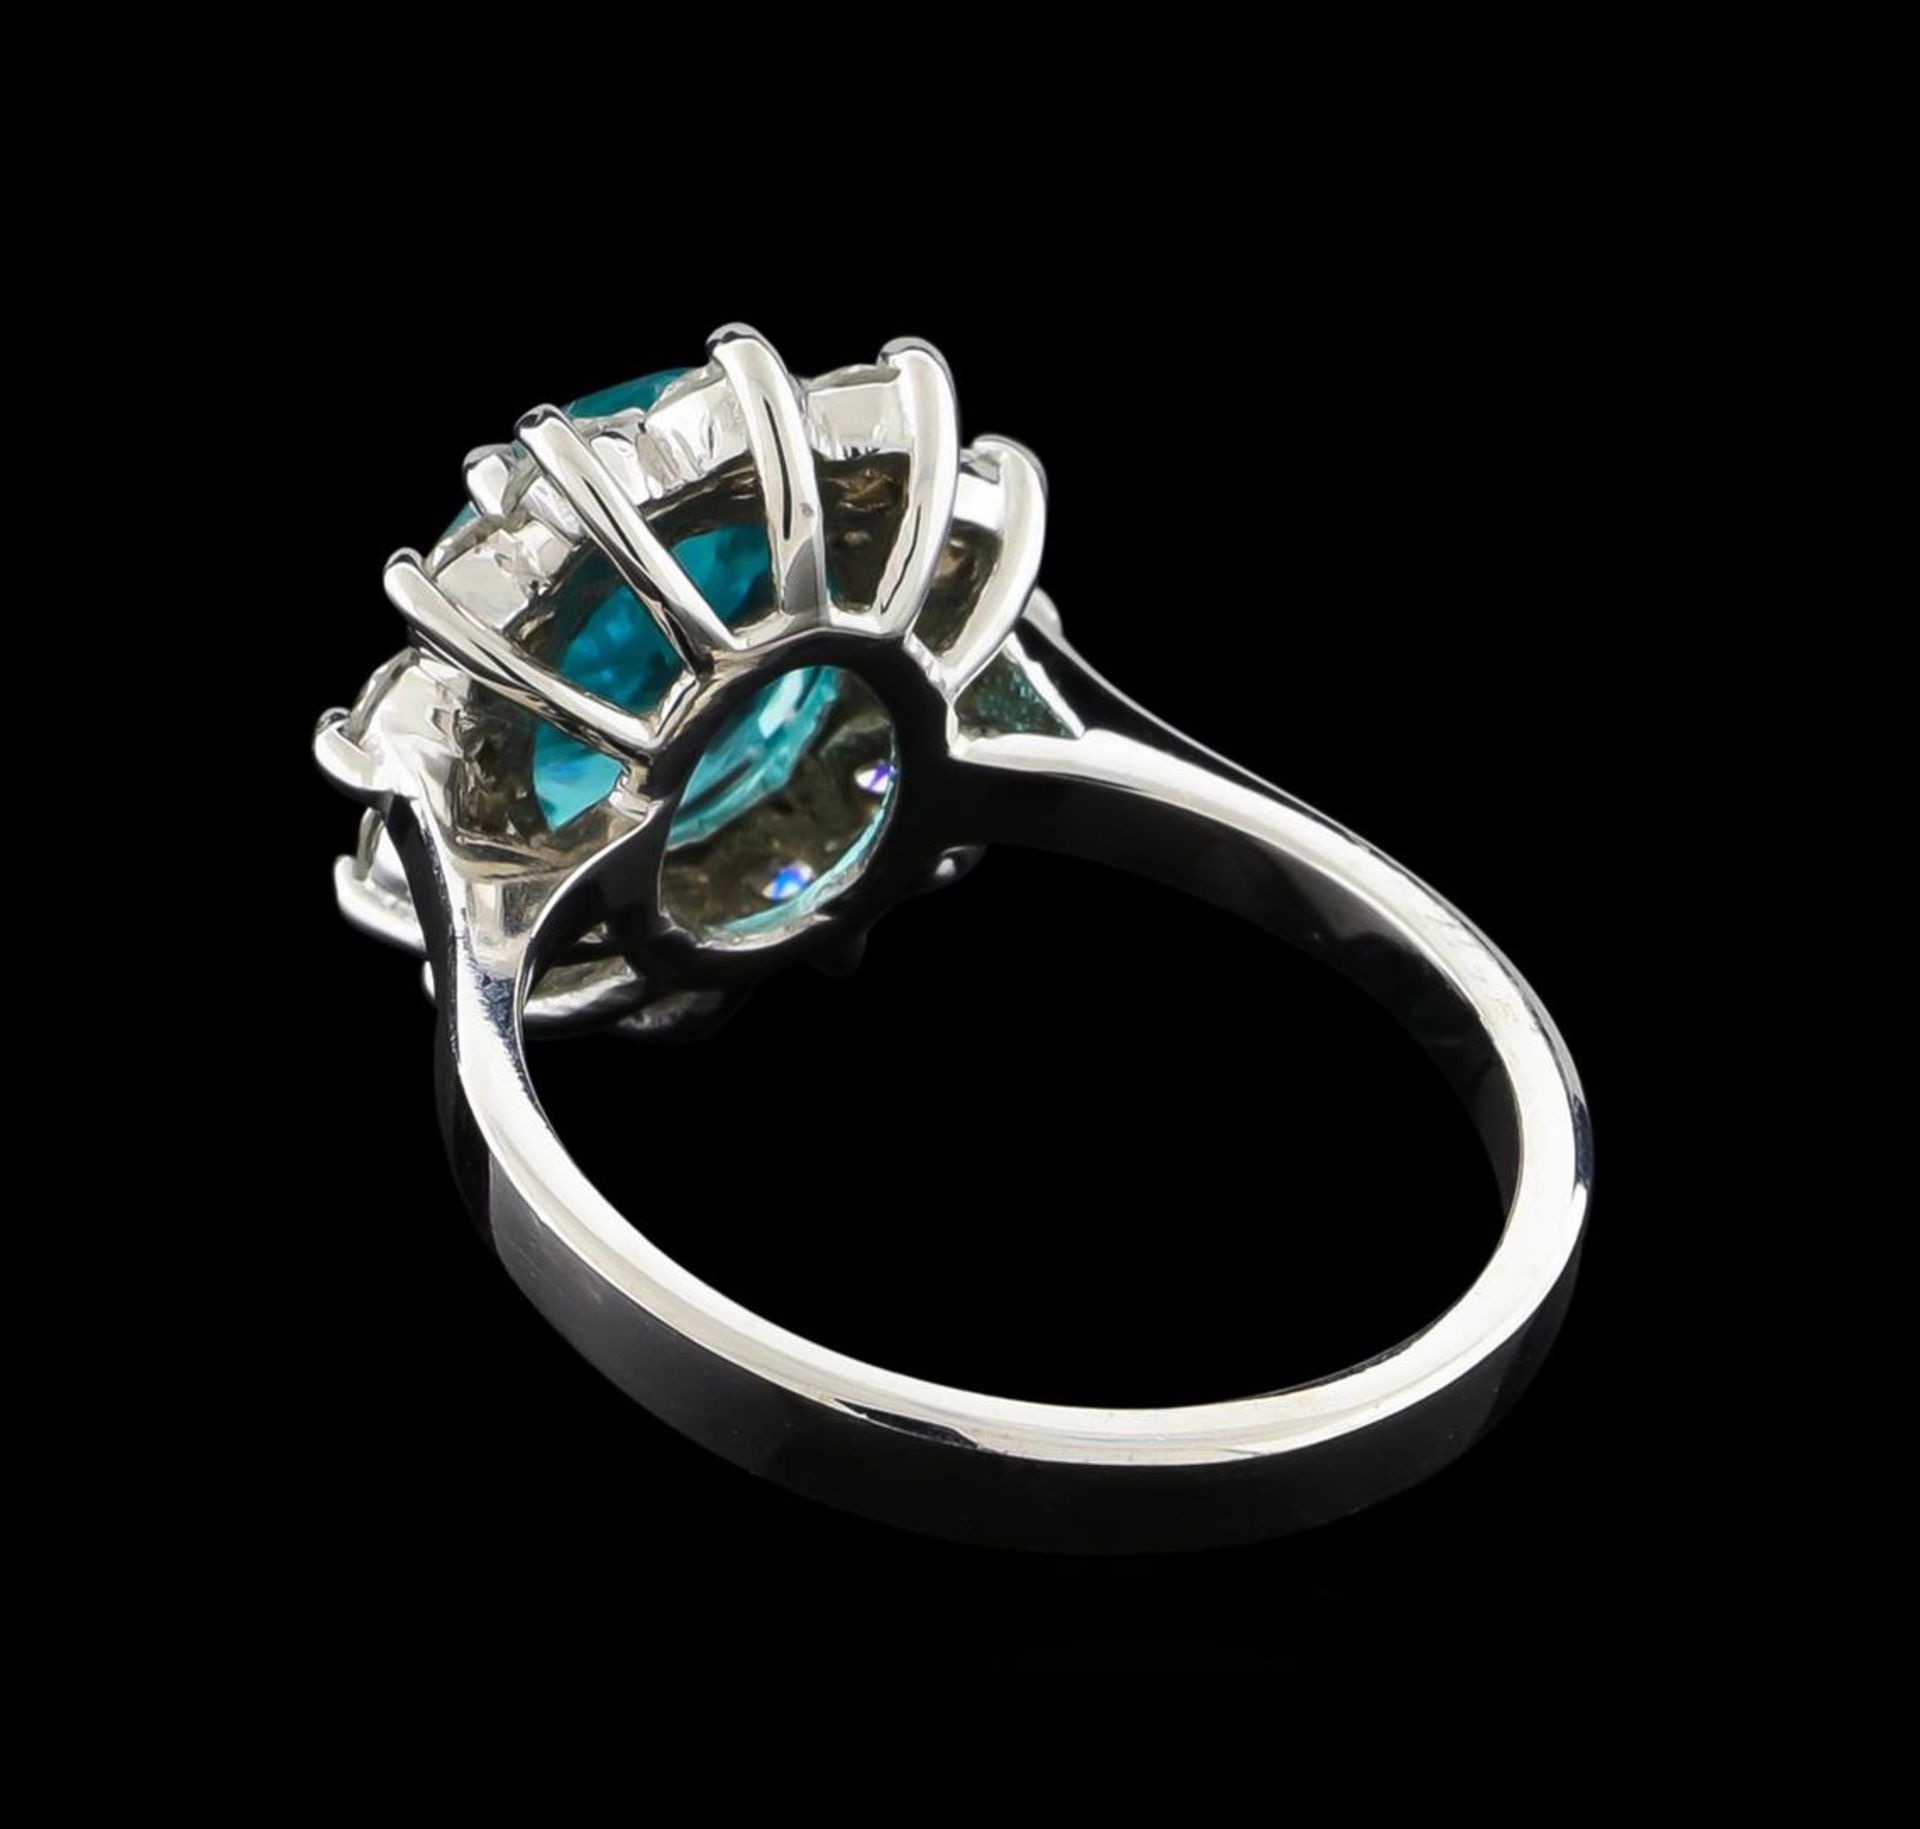 2.78 ctw Apatite and Diamond Ring - 14KT White Gold - Image 2 of 4